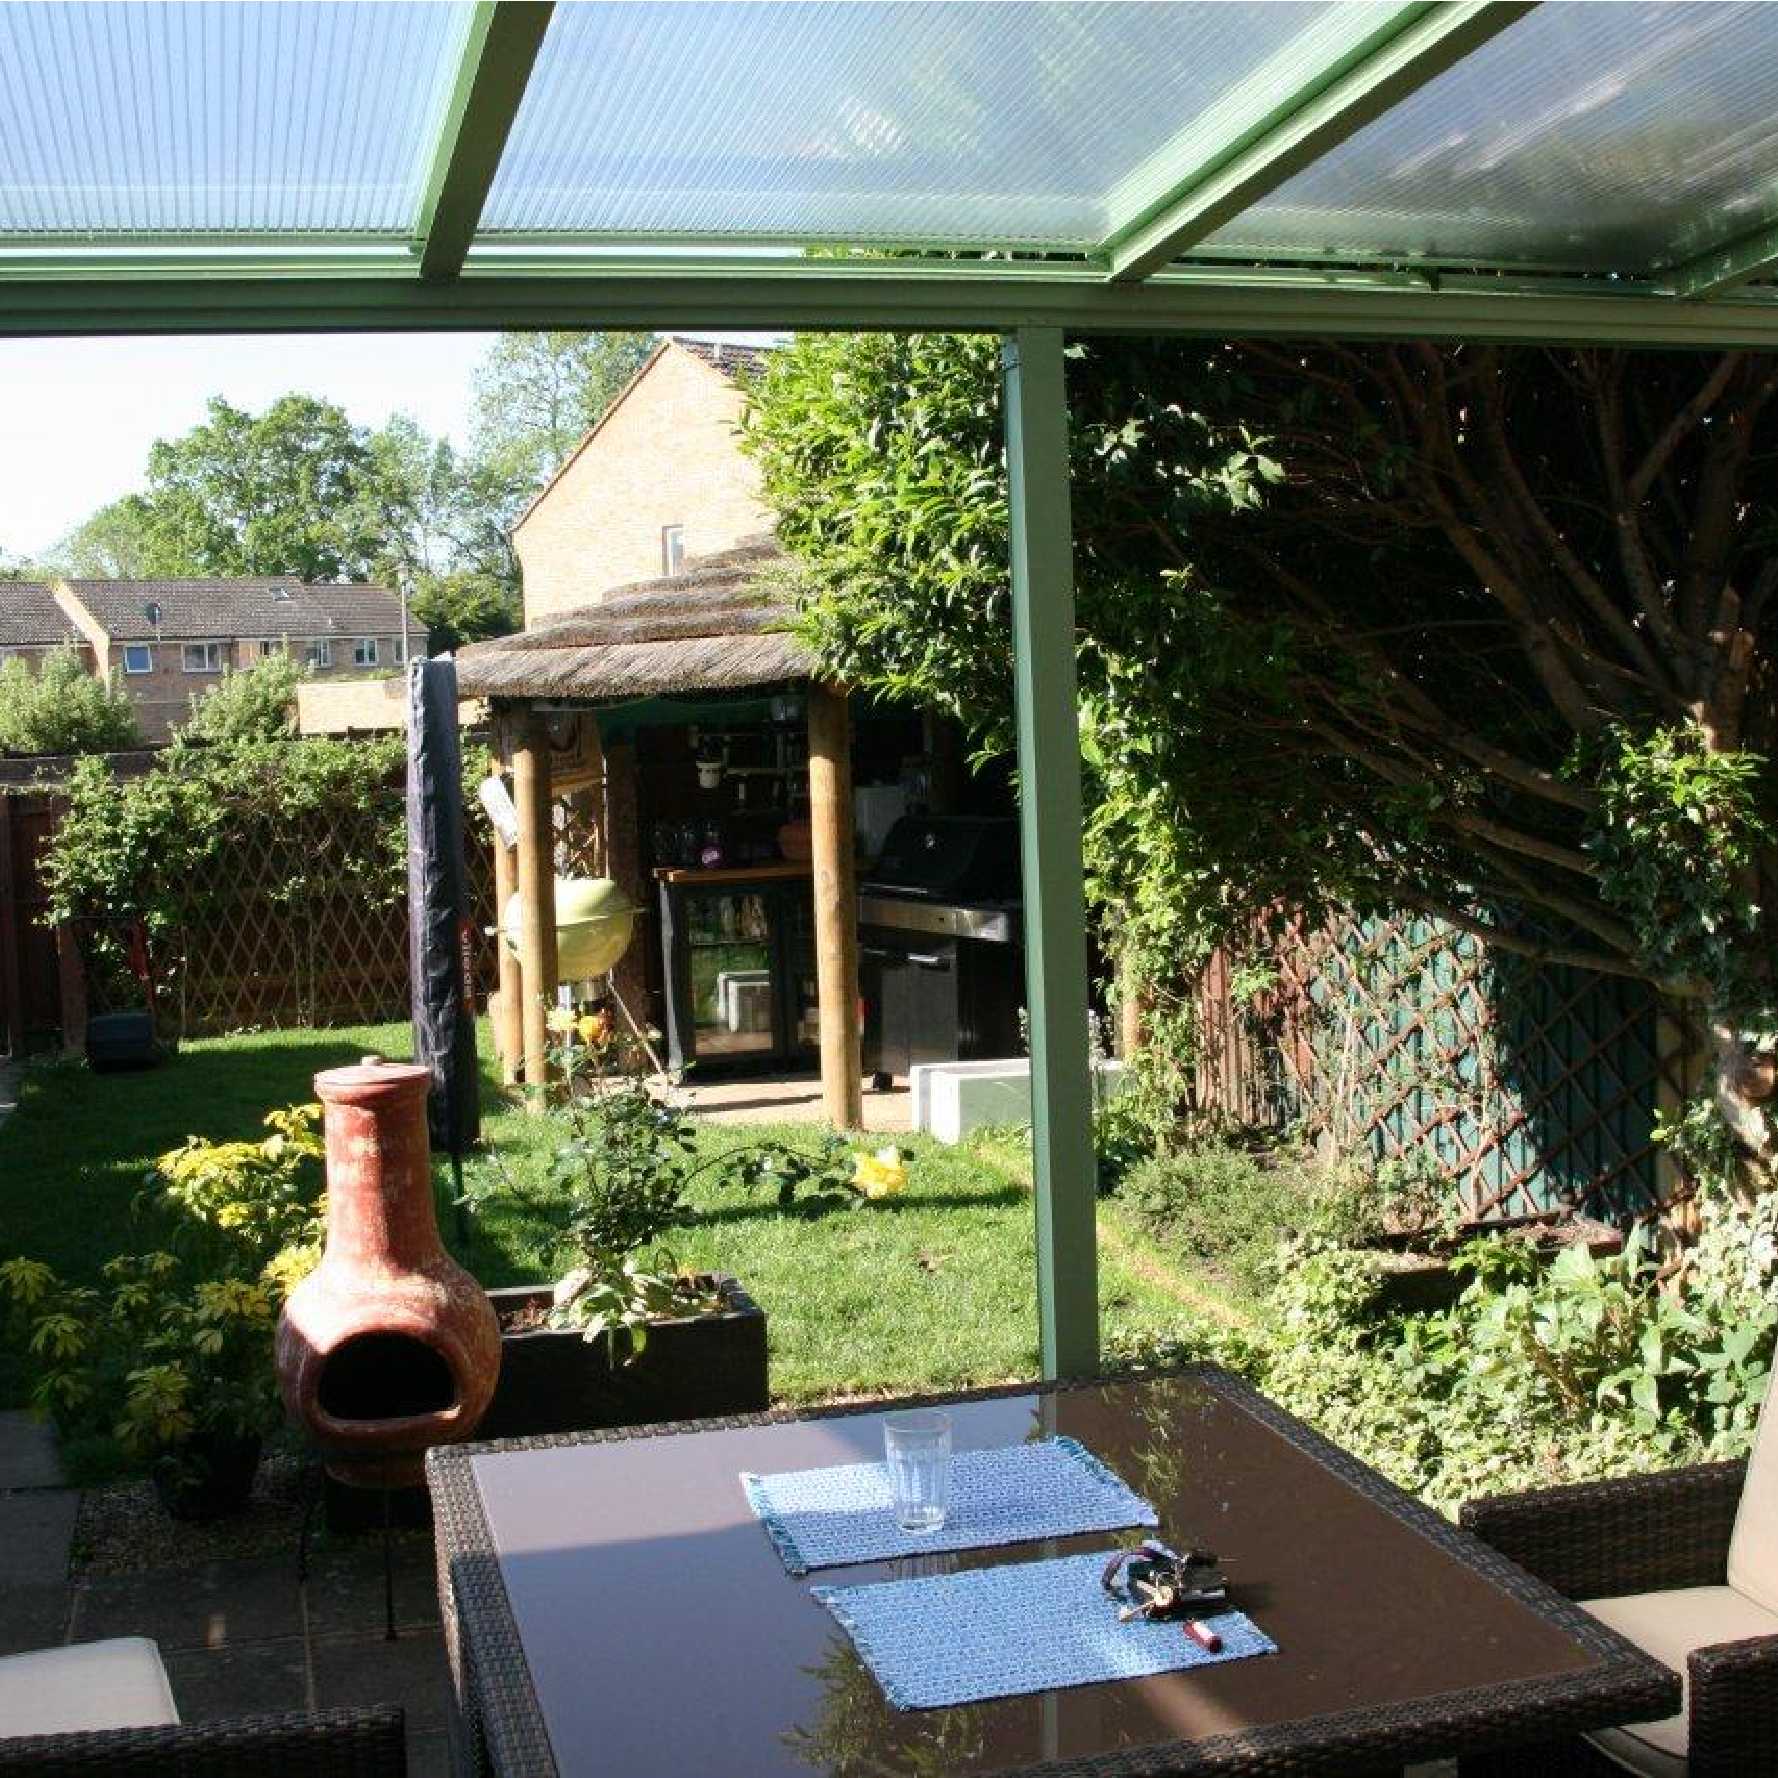 Affordable Omega Smart Lean-To Canopy, White with 16mm Polycarbonate Glazing - 2.1m (W) x 3.0m (P), (2) Supporting Posts